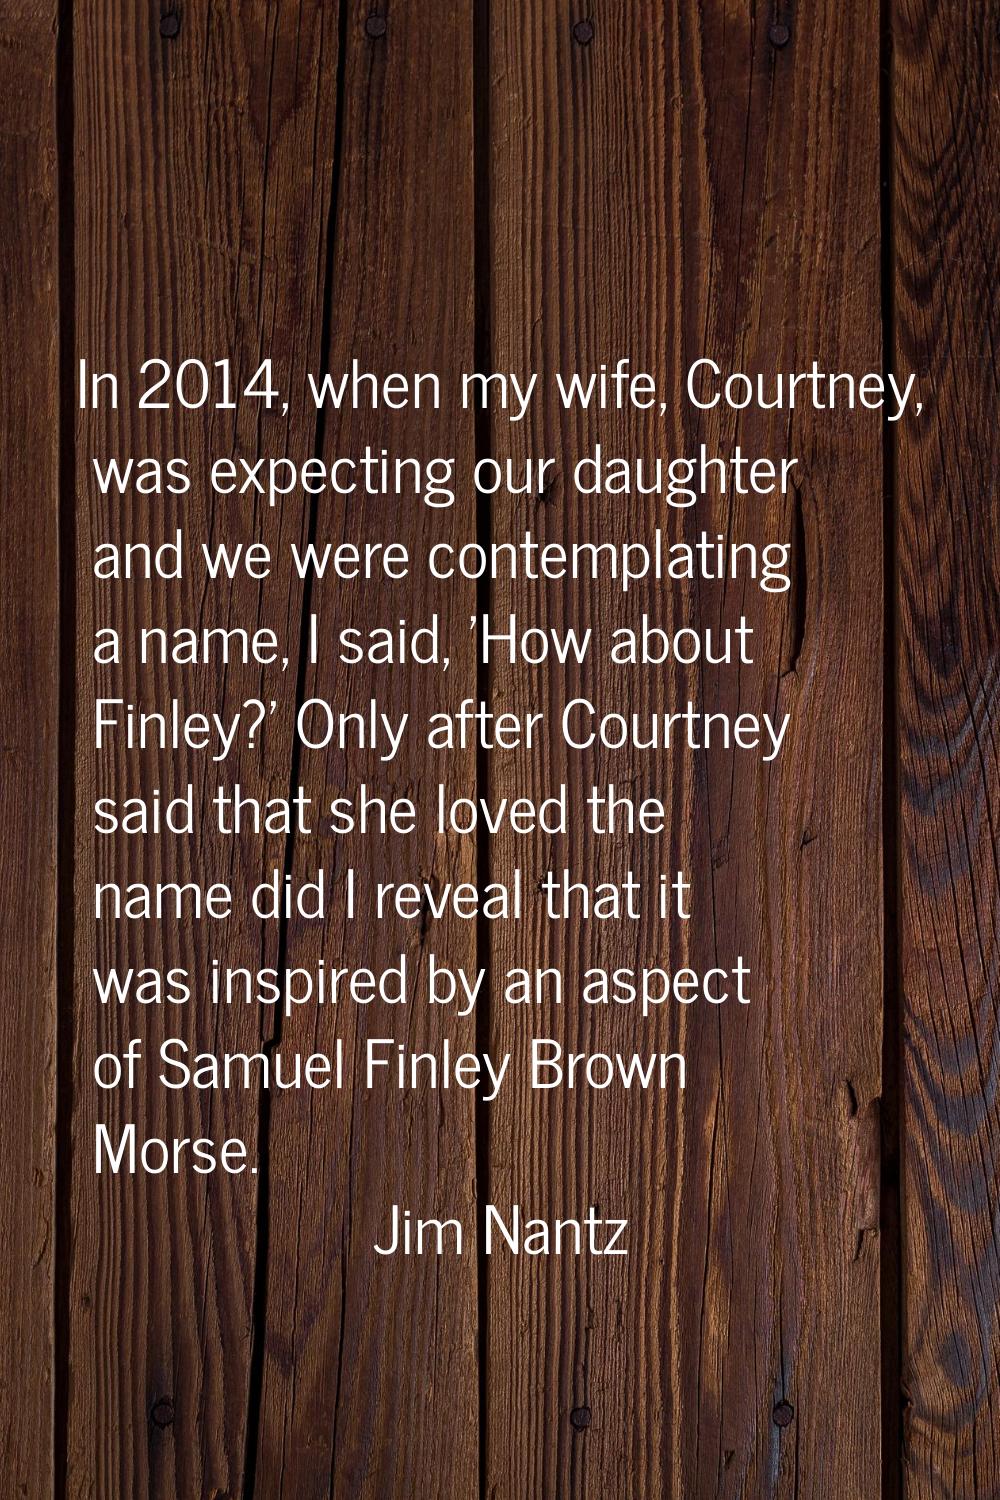 In 2014, when my wife, Courtney, was expecting our daughter and we were contemplating a name, I sai